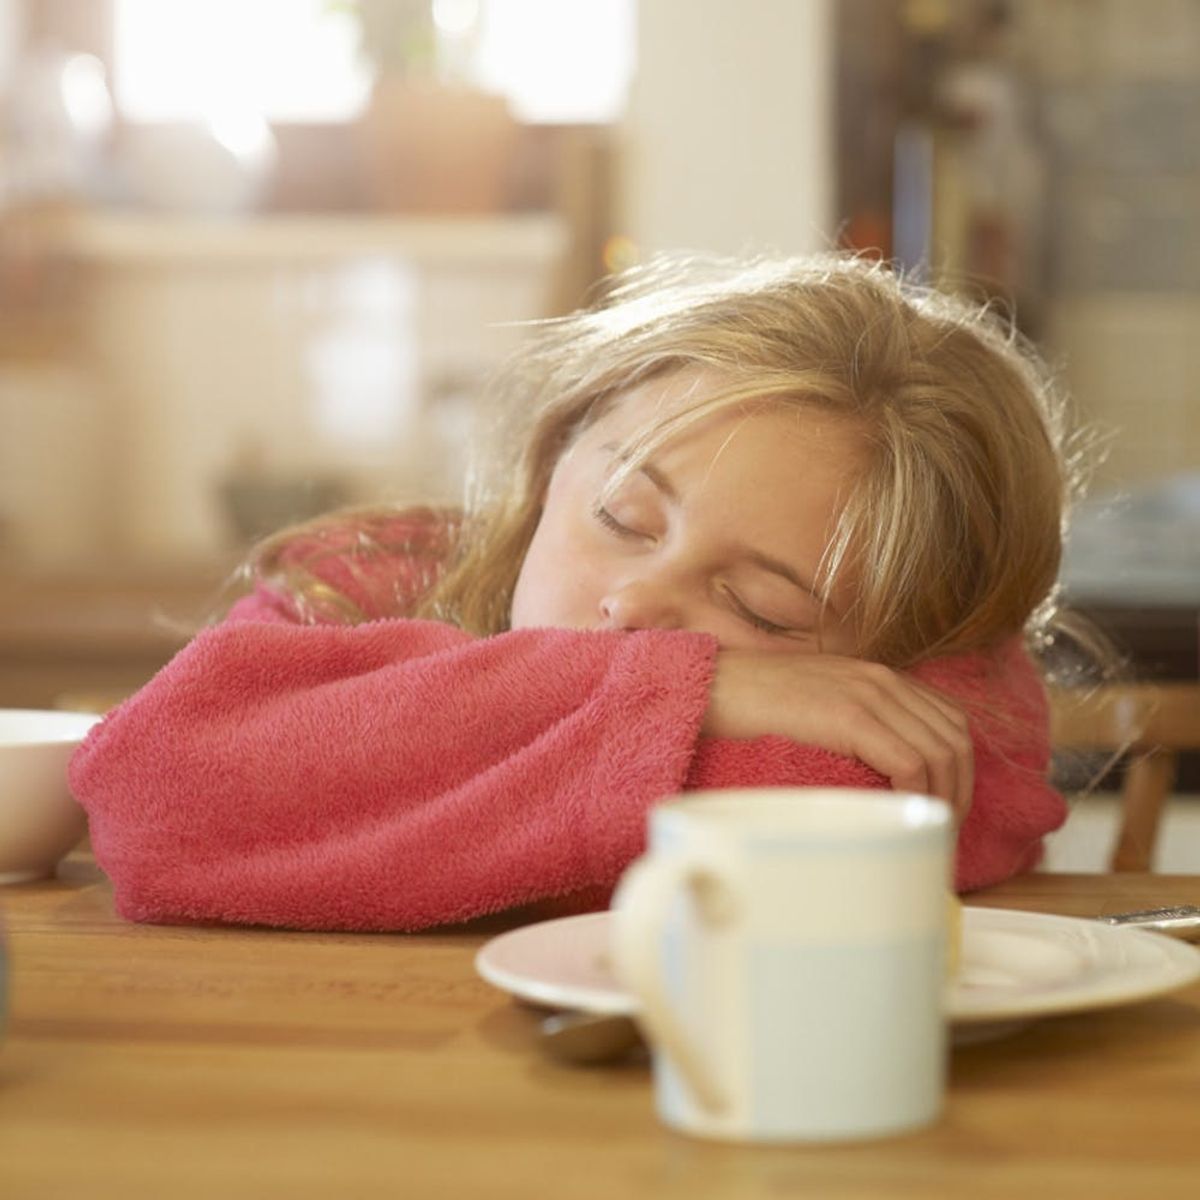 Why You Shouldn’t Stress Out About When Your Kids’ Bedtimes *Should* Be